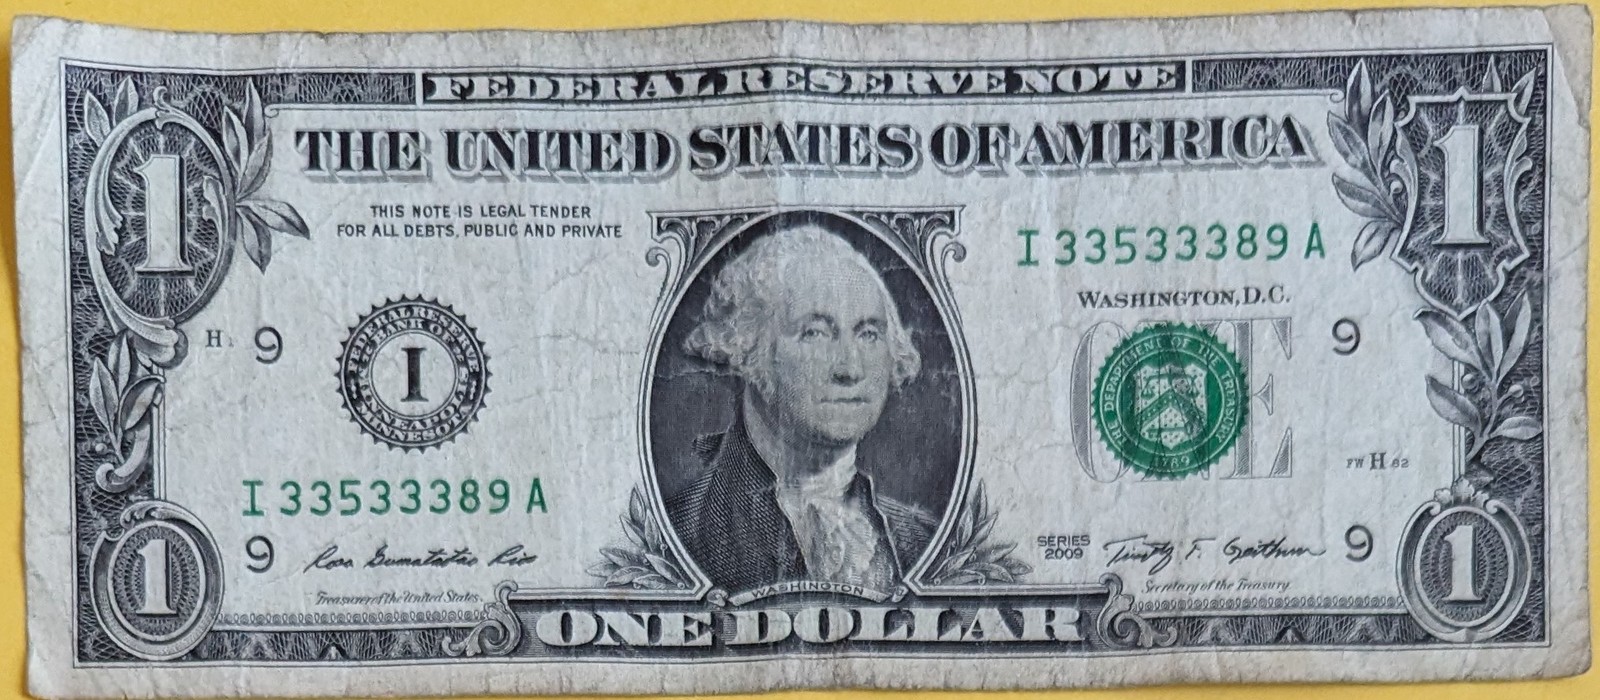 US$1 2009 Federal Reserve Bank Note 5 of a Kind Lucky 3's #33533389 - $5.95